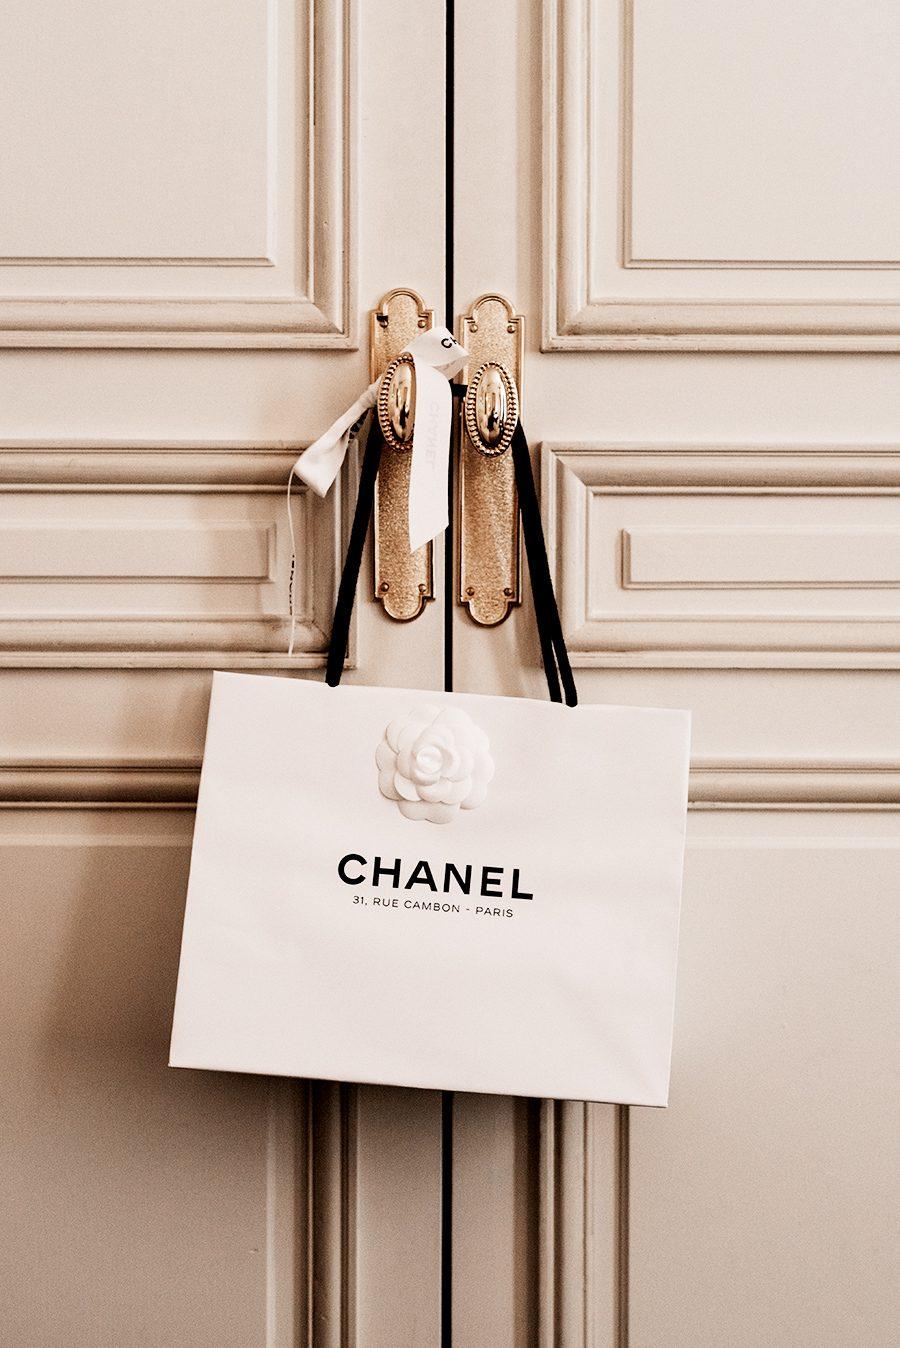 Gabrielle Chanel Paris Logo - Inside The Launch Of The New Gabrielle Chanel Fragrance. Not Your